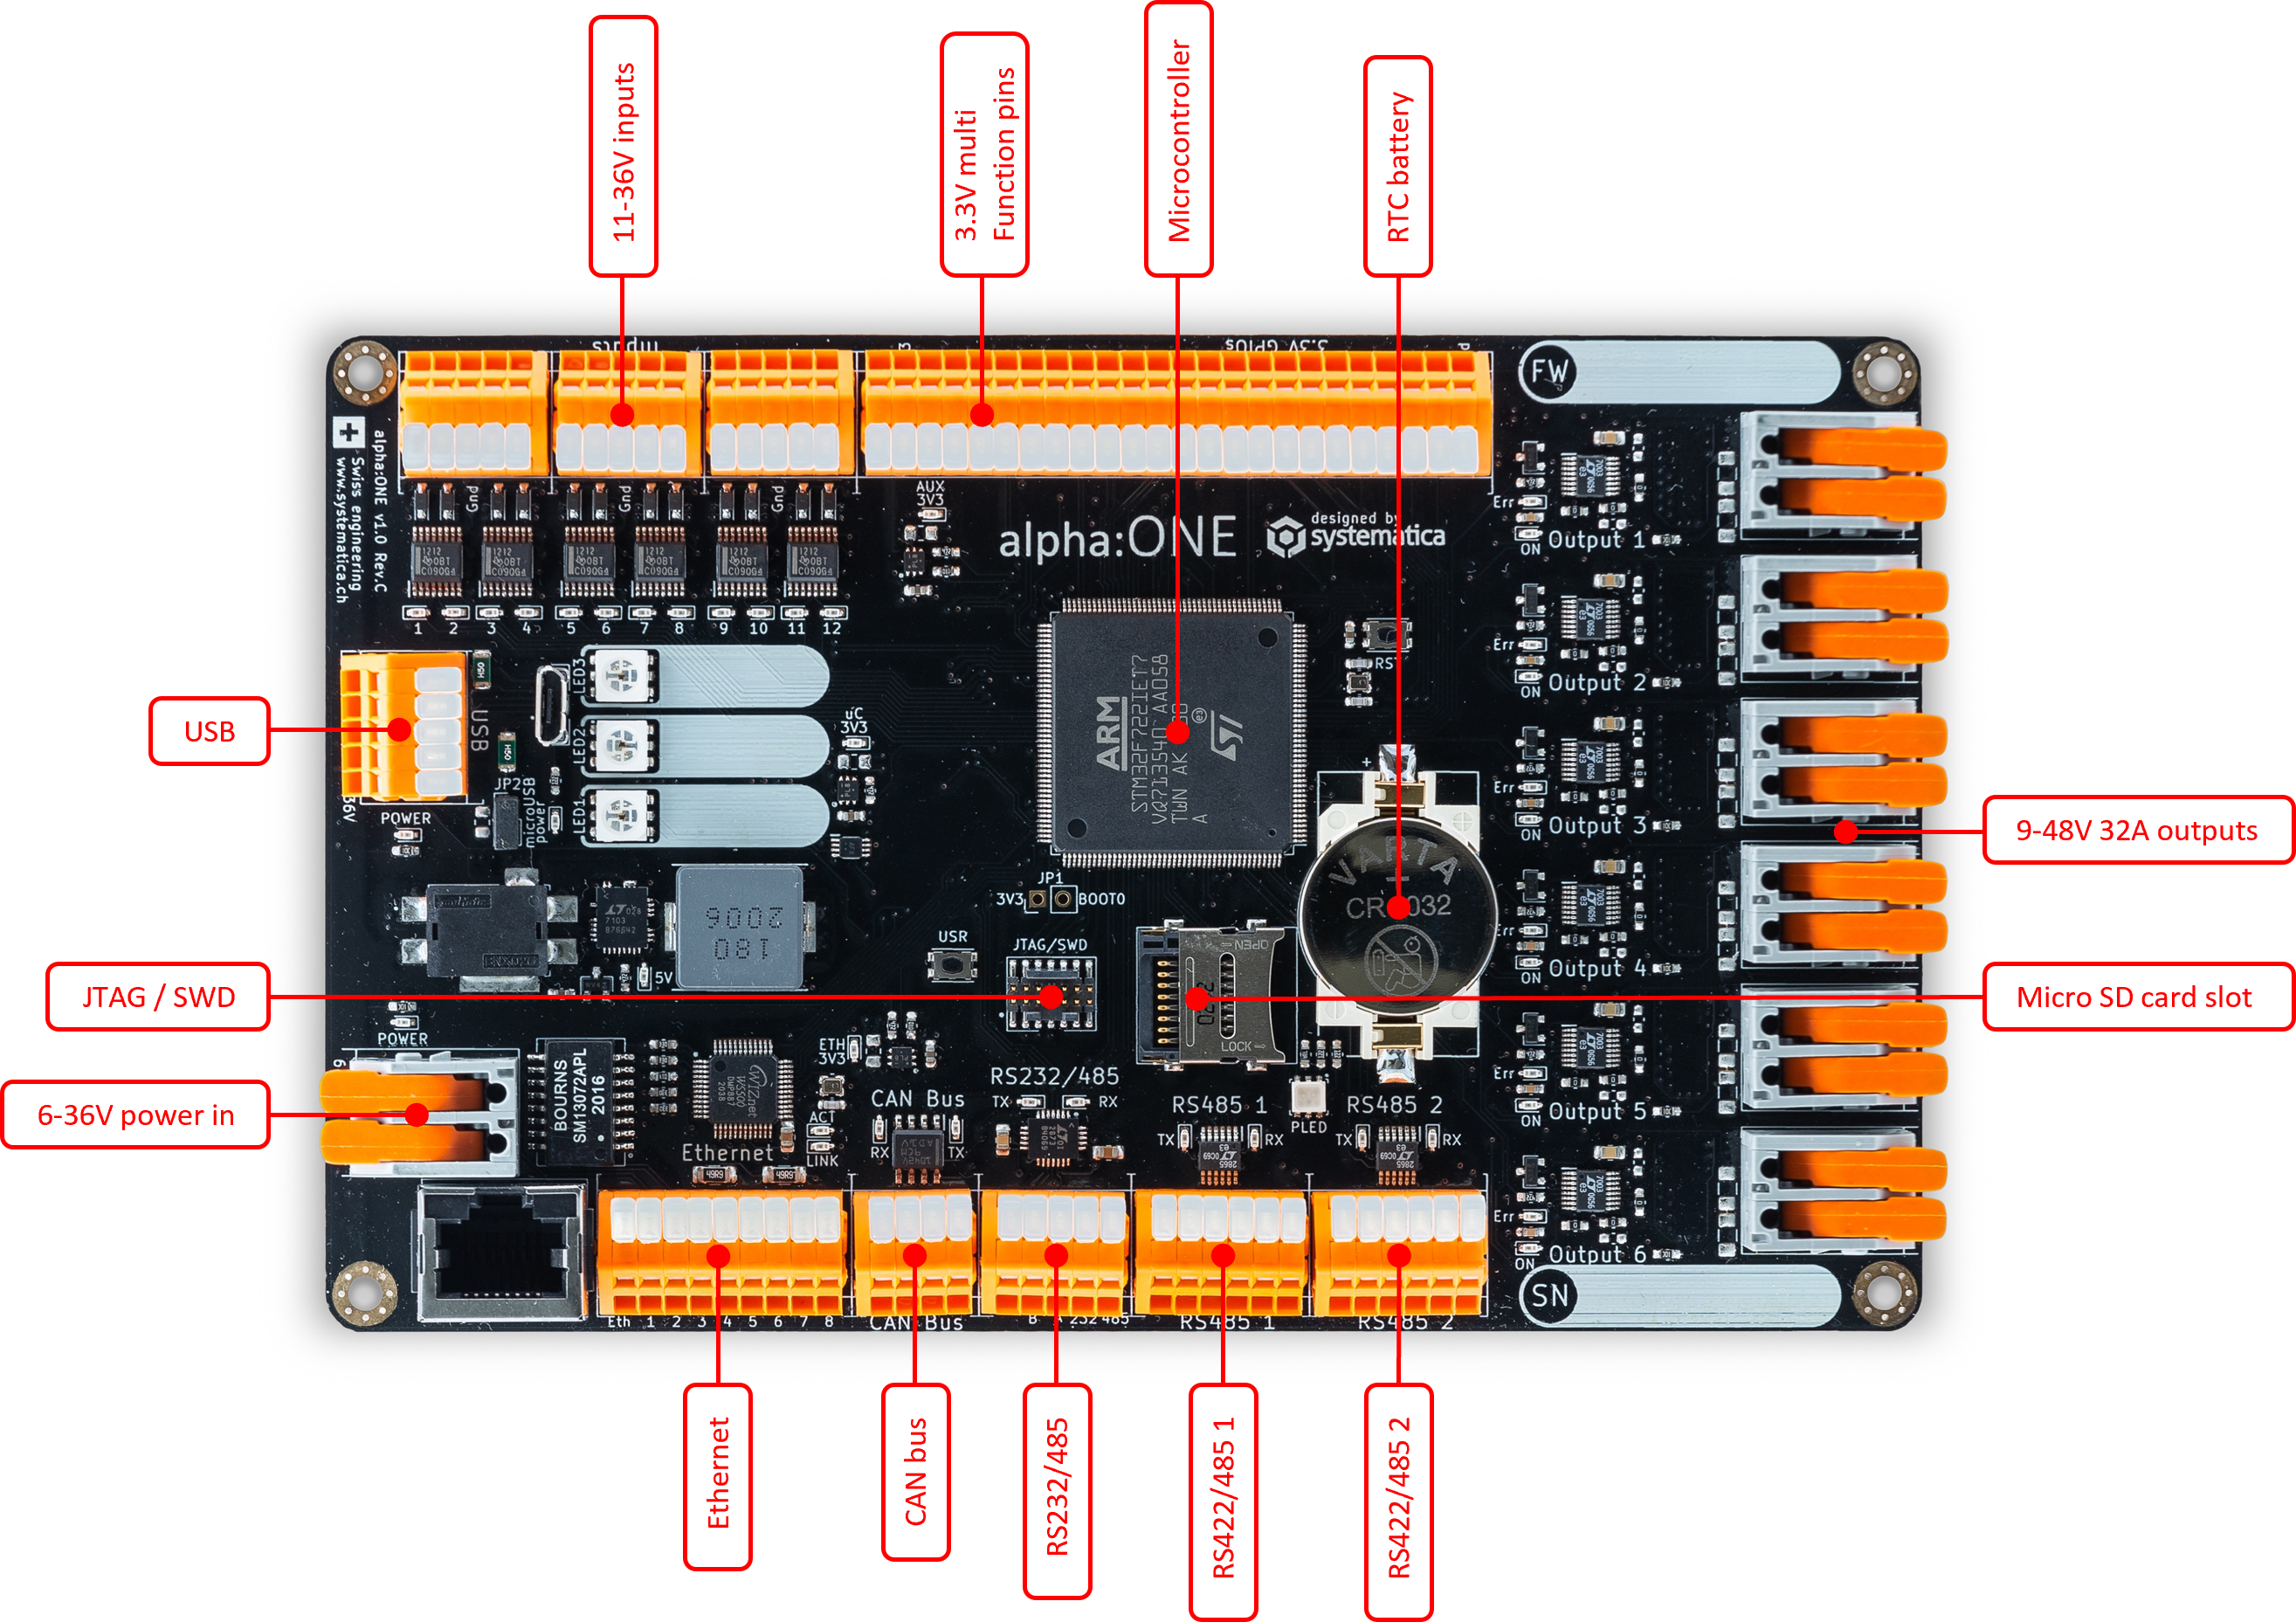 _images/alphaone_overview.png